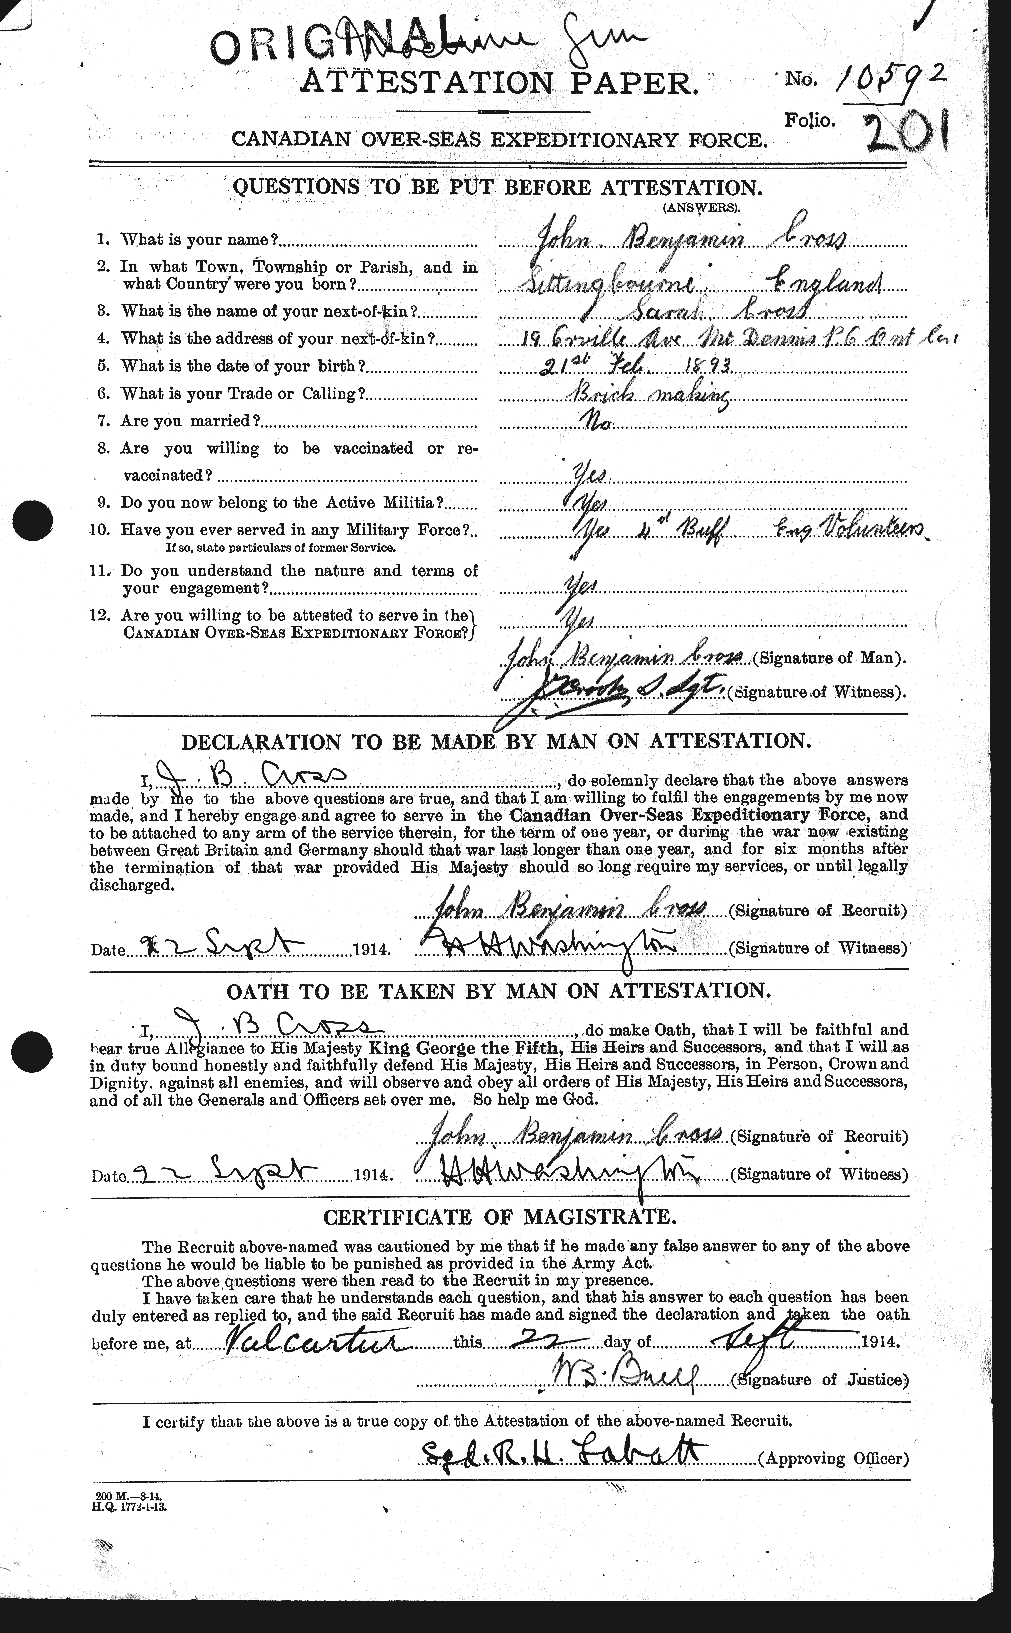 Personnel Records of the First World War - CEF 064474a